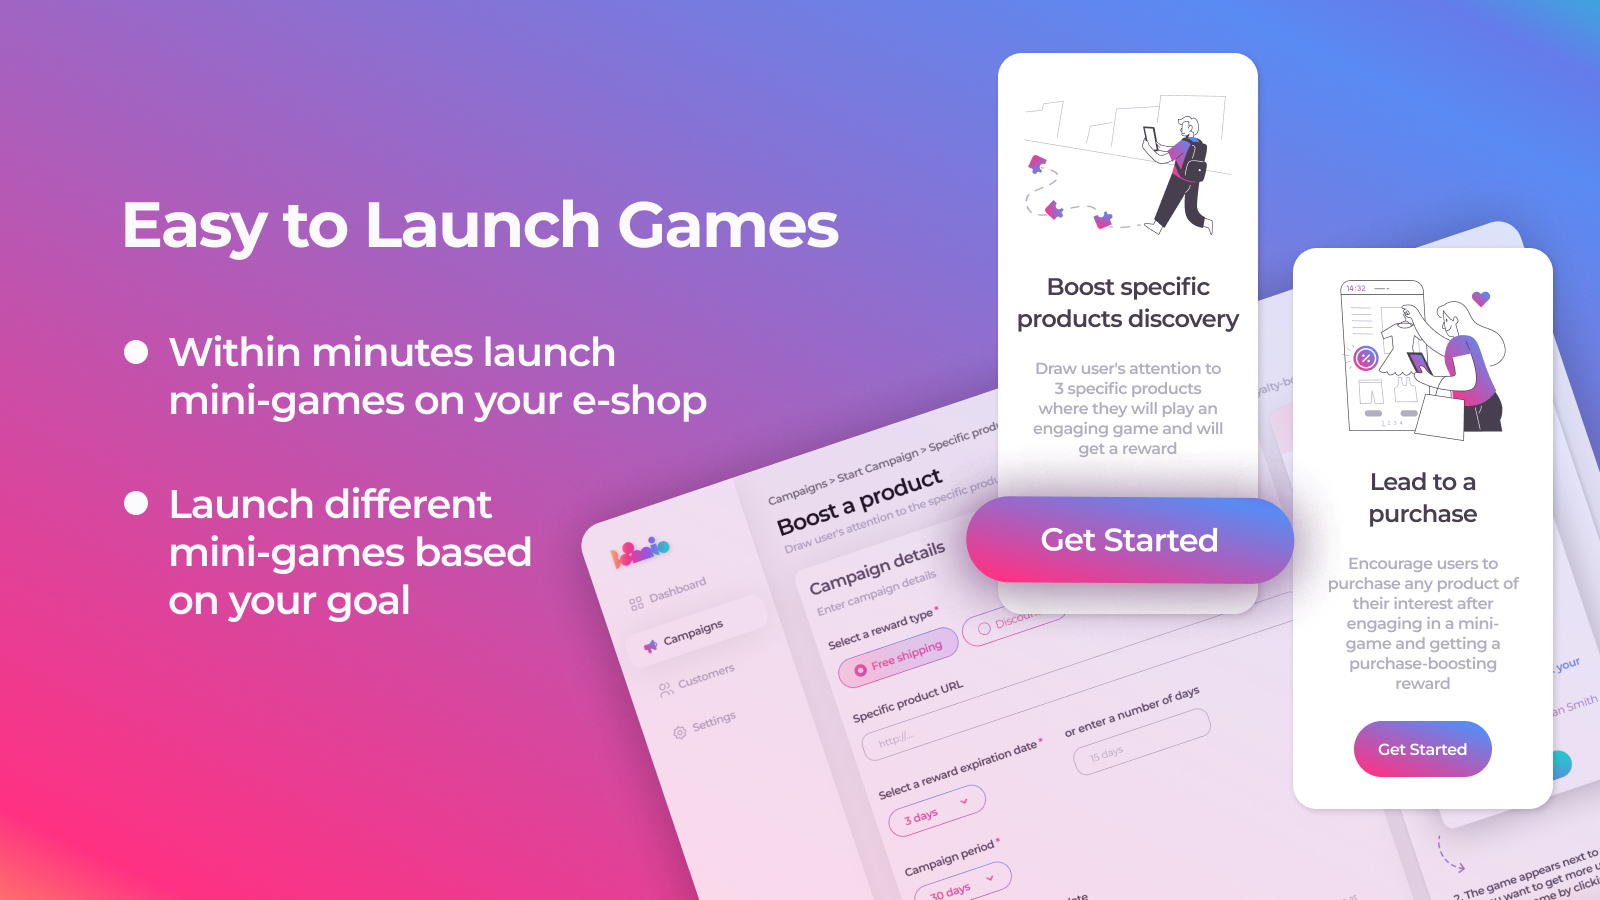 Simplified Launch Process - Our Easy-to-Launch Games feature streamlines the setup, ensuring that you spend less time managing and more time engaging with your audience.